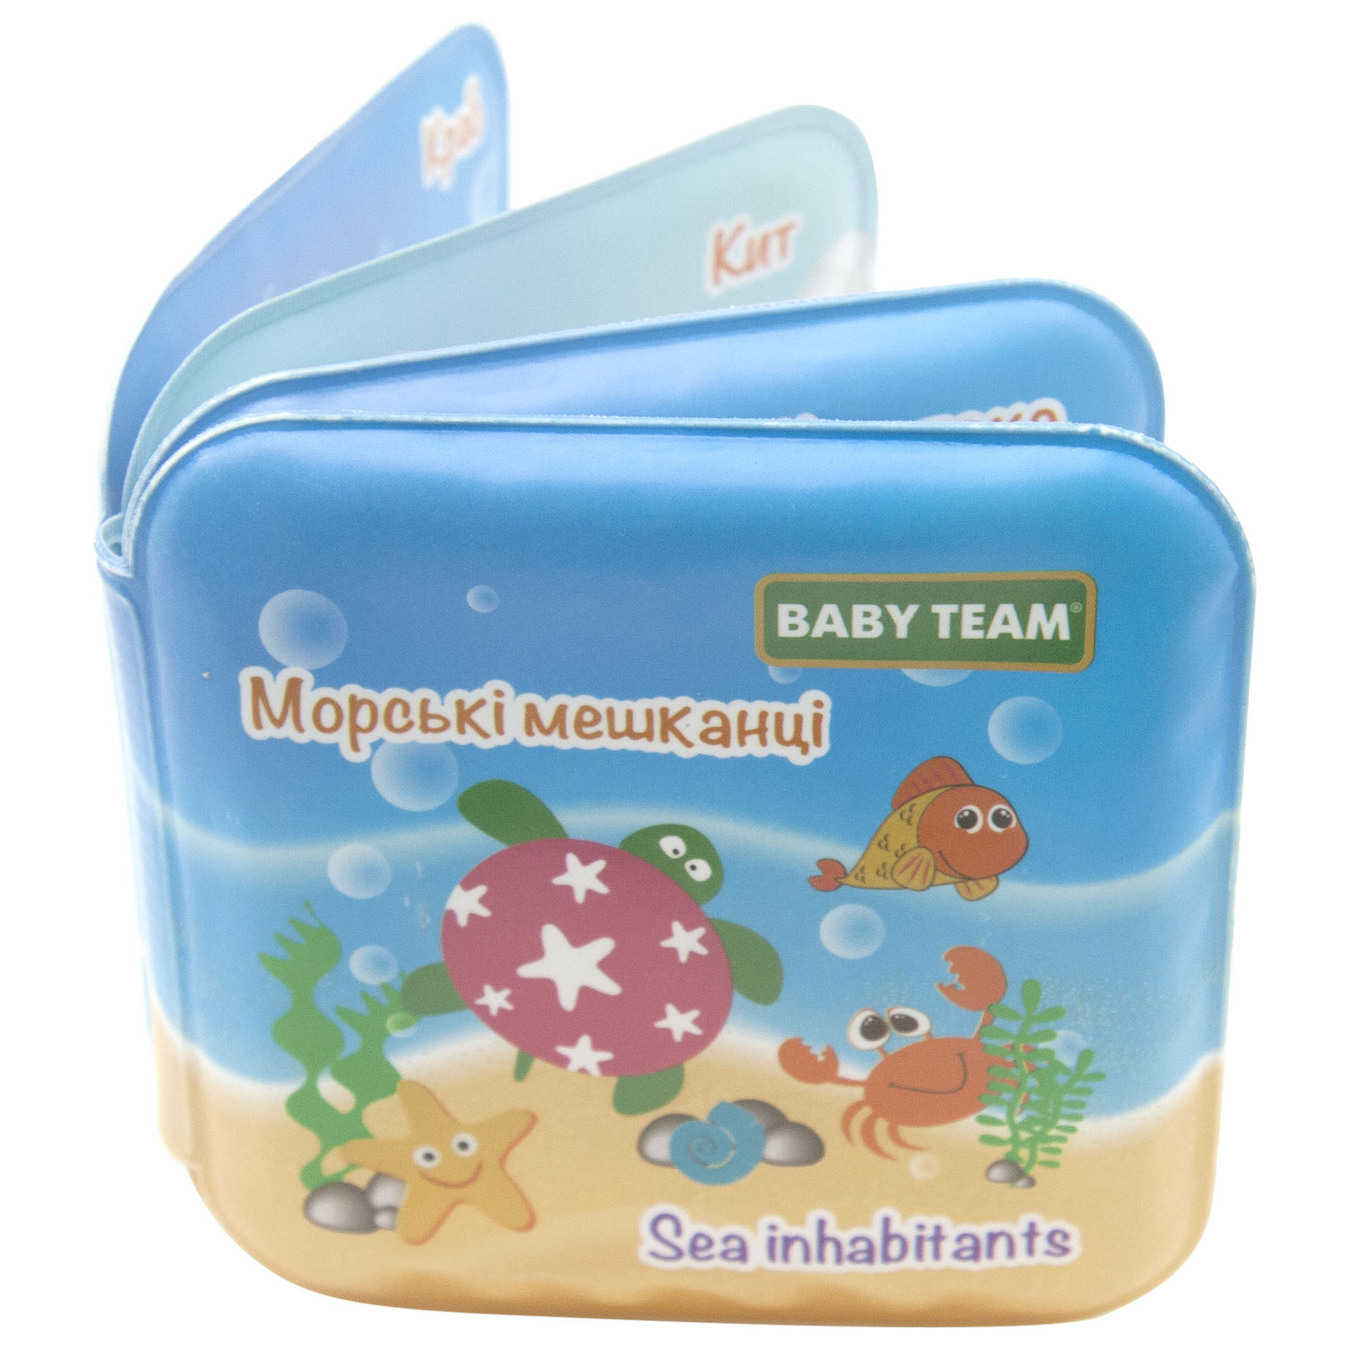 Baby Team toy-book for the bathroom